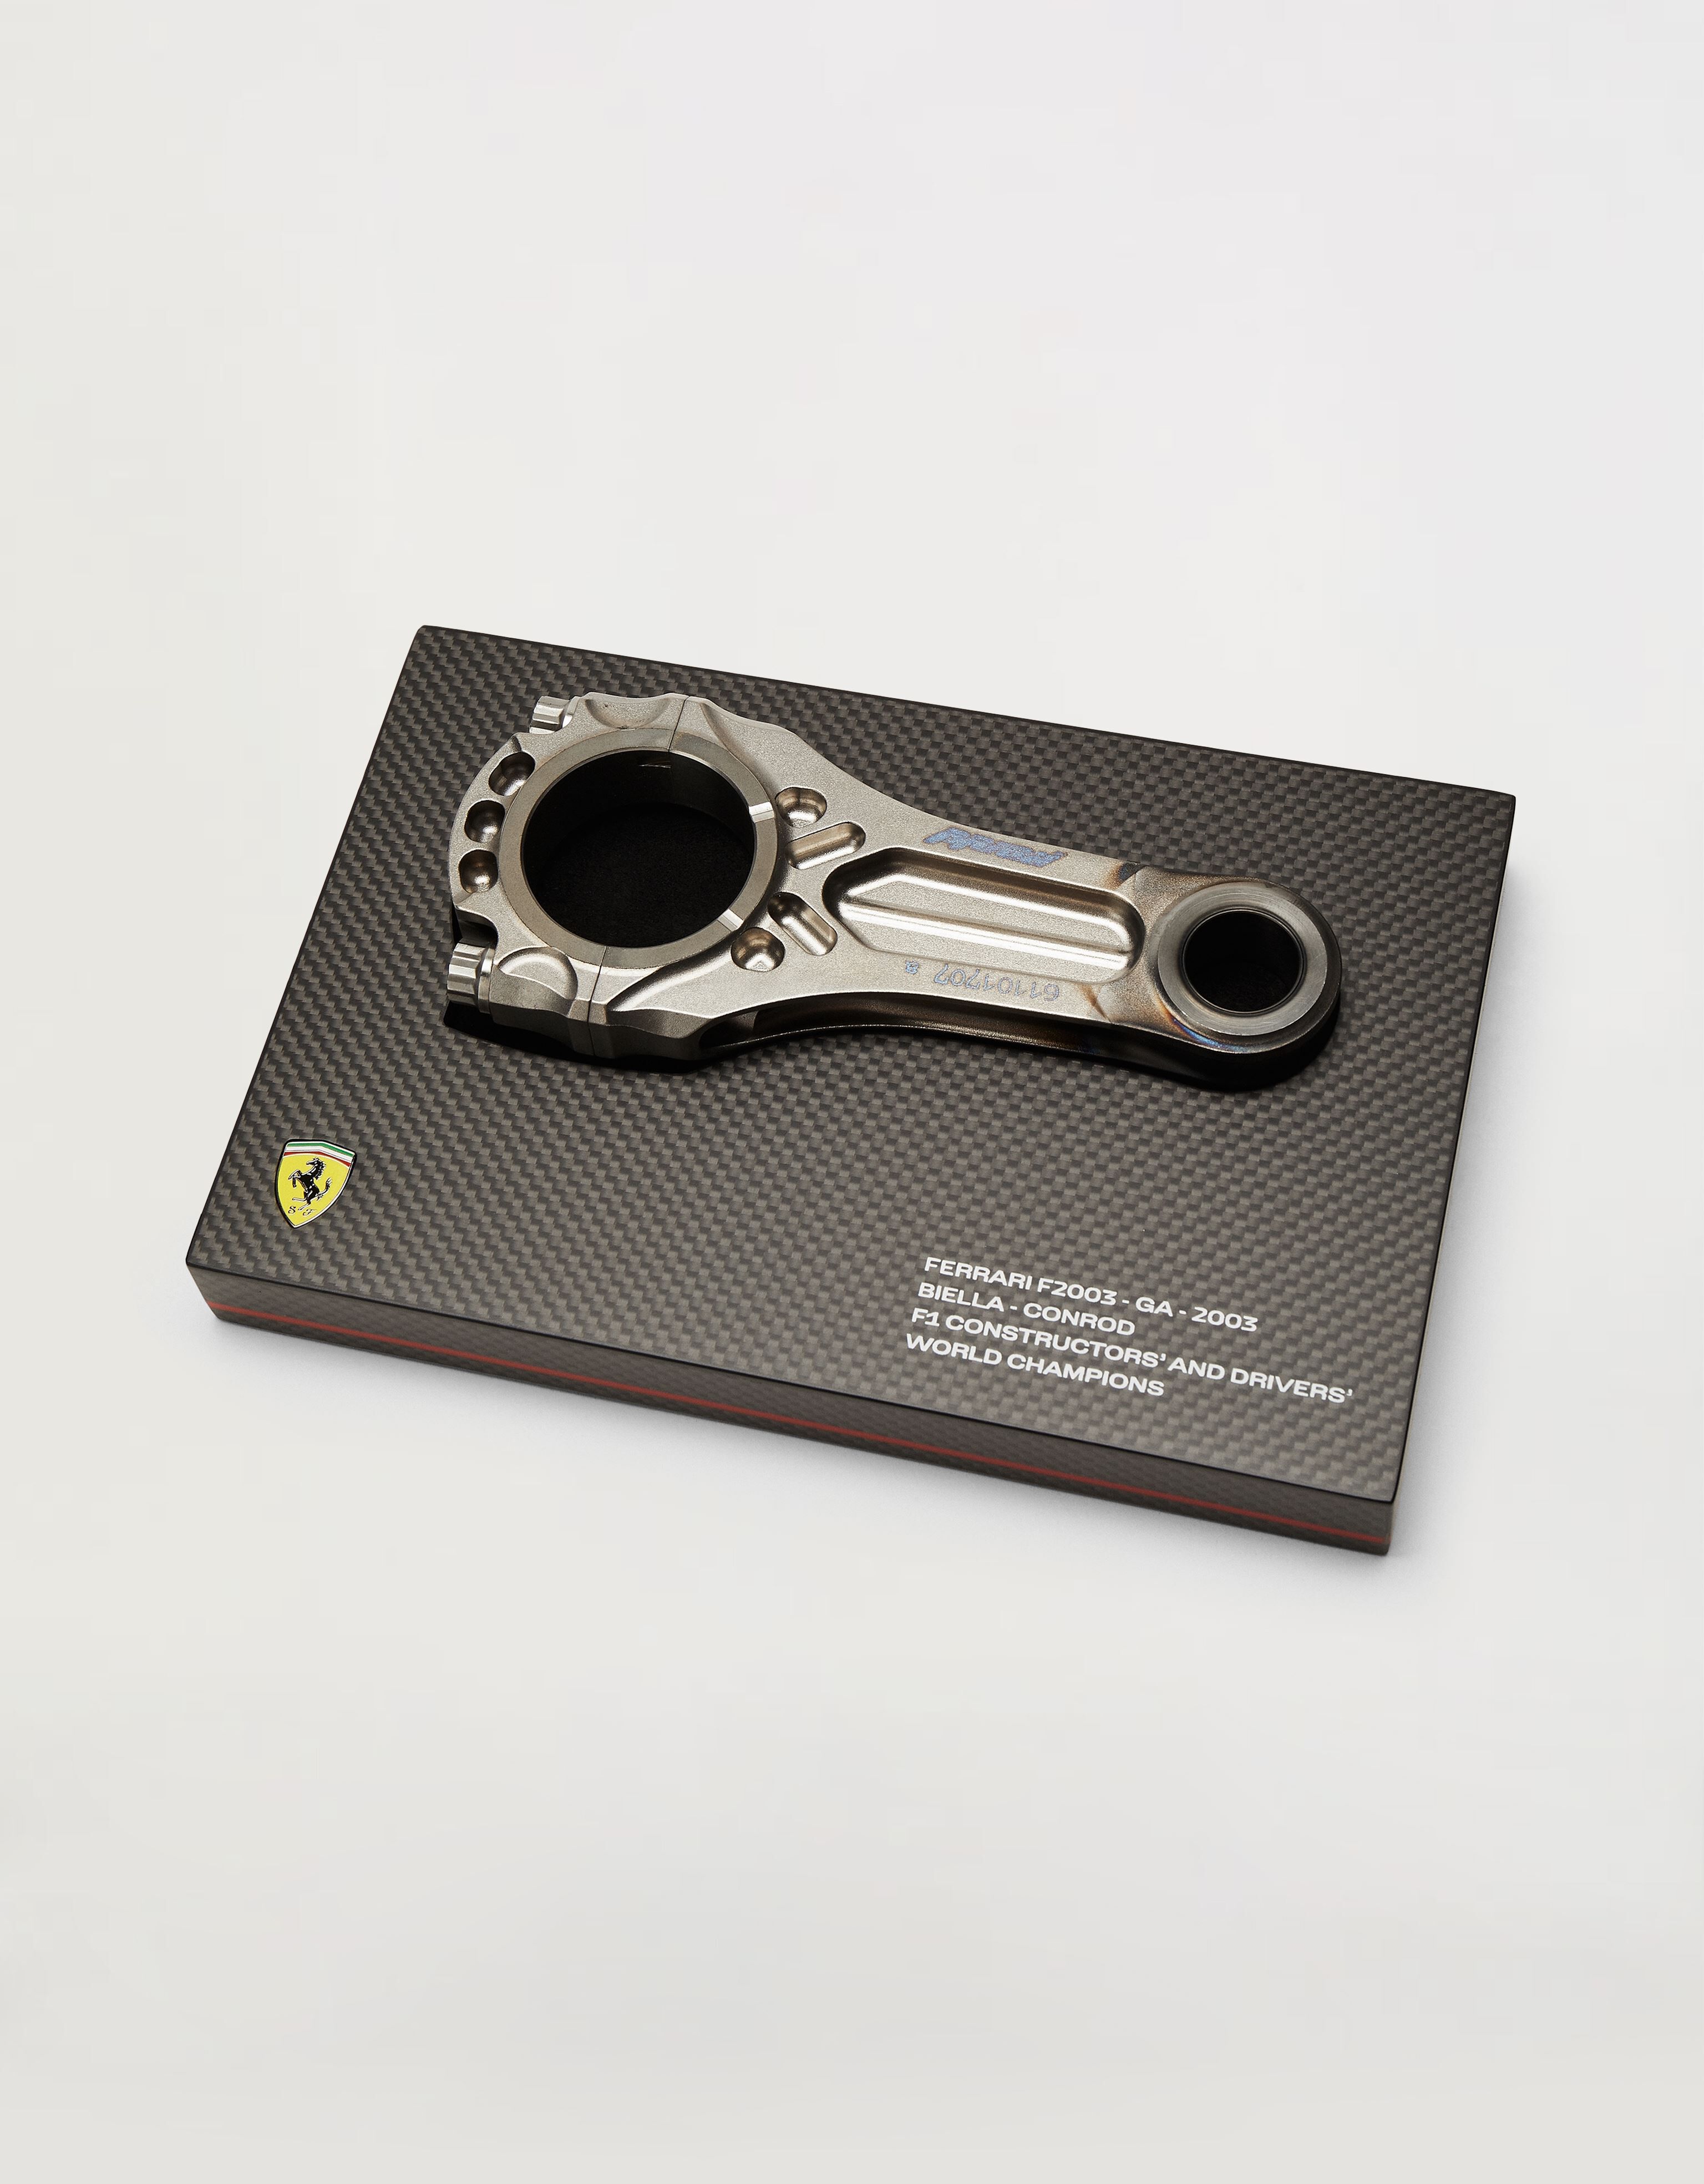 Ferrari Original piston from the F2003, winner of the 2003 Constructors' and Drivers' Championships Yellow F0650f